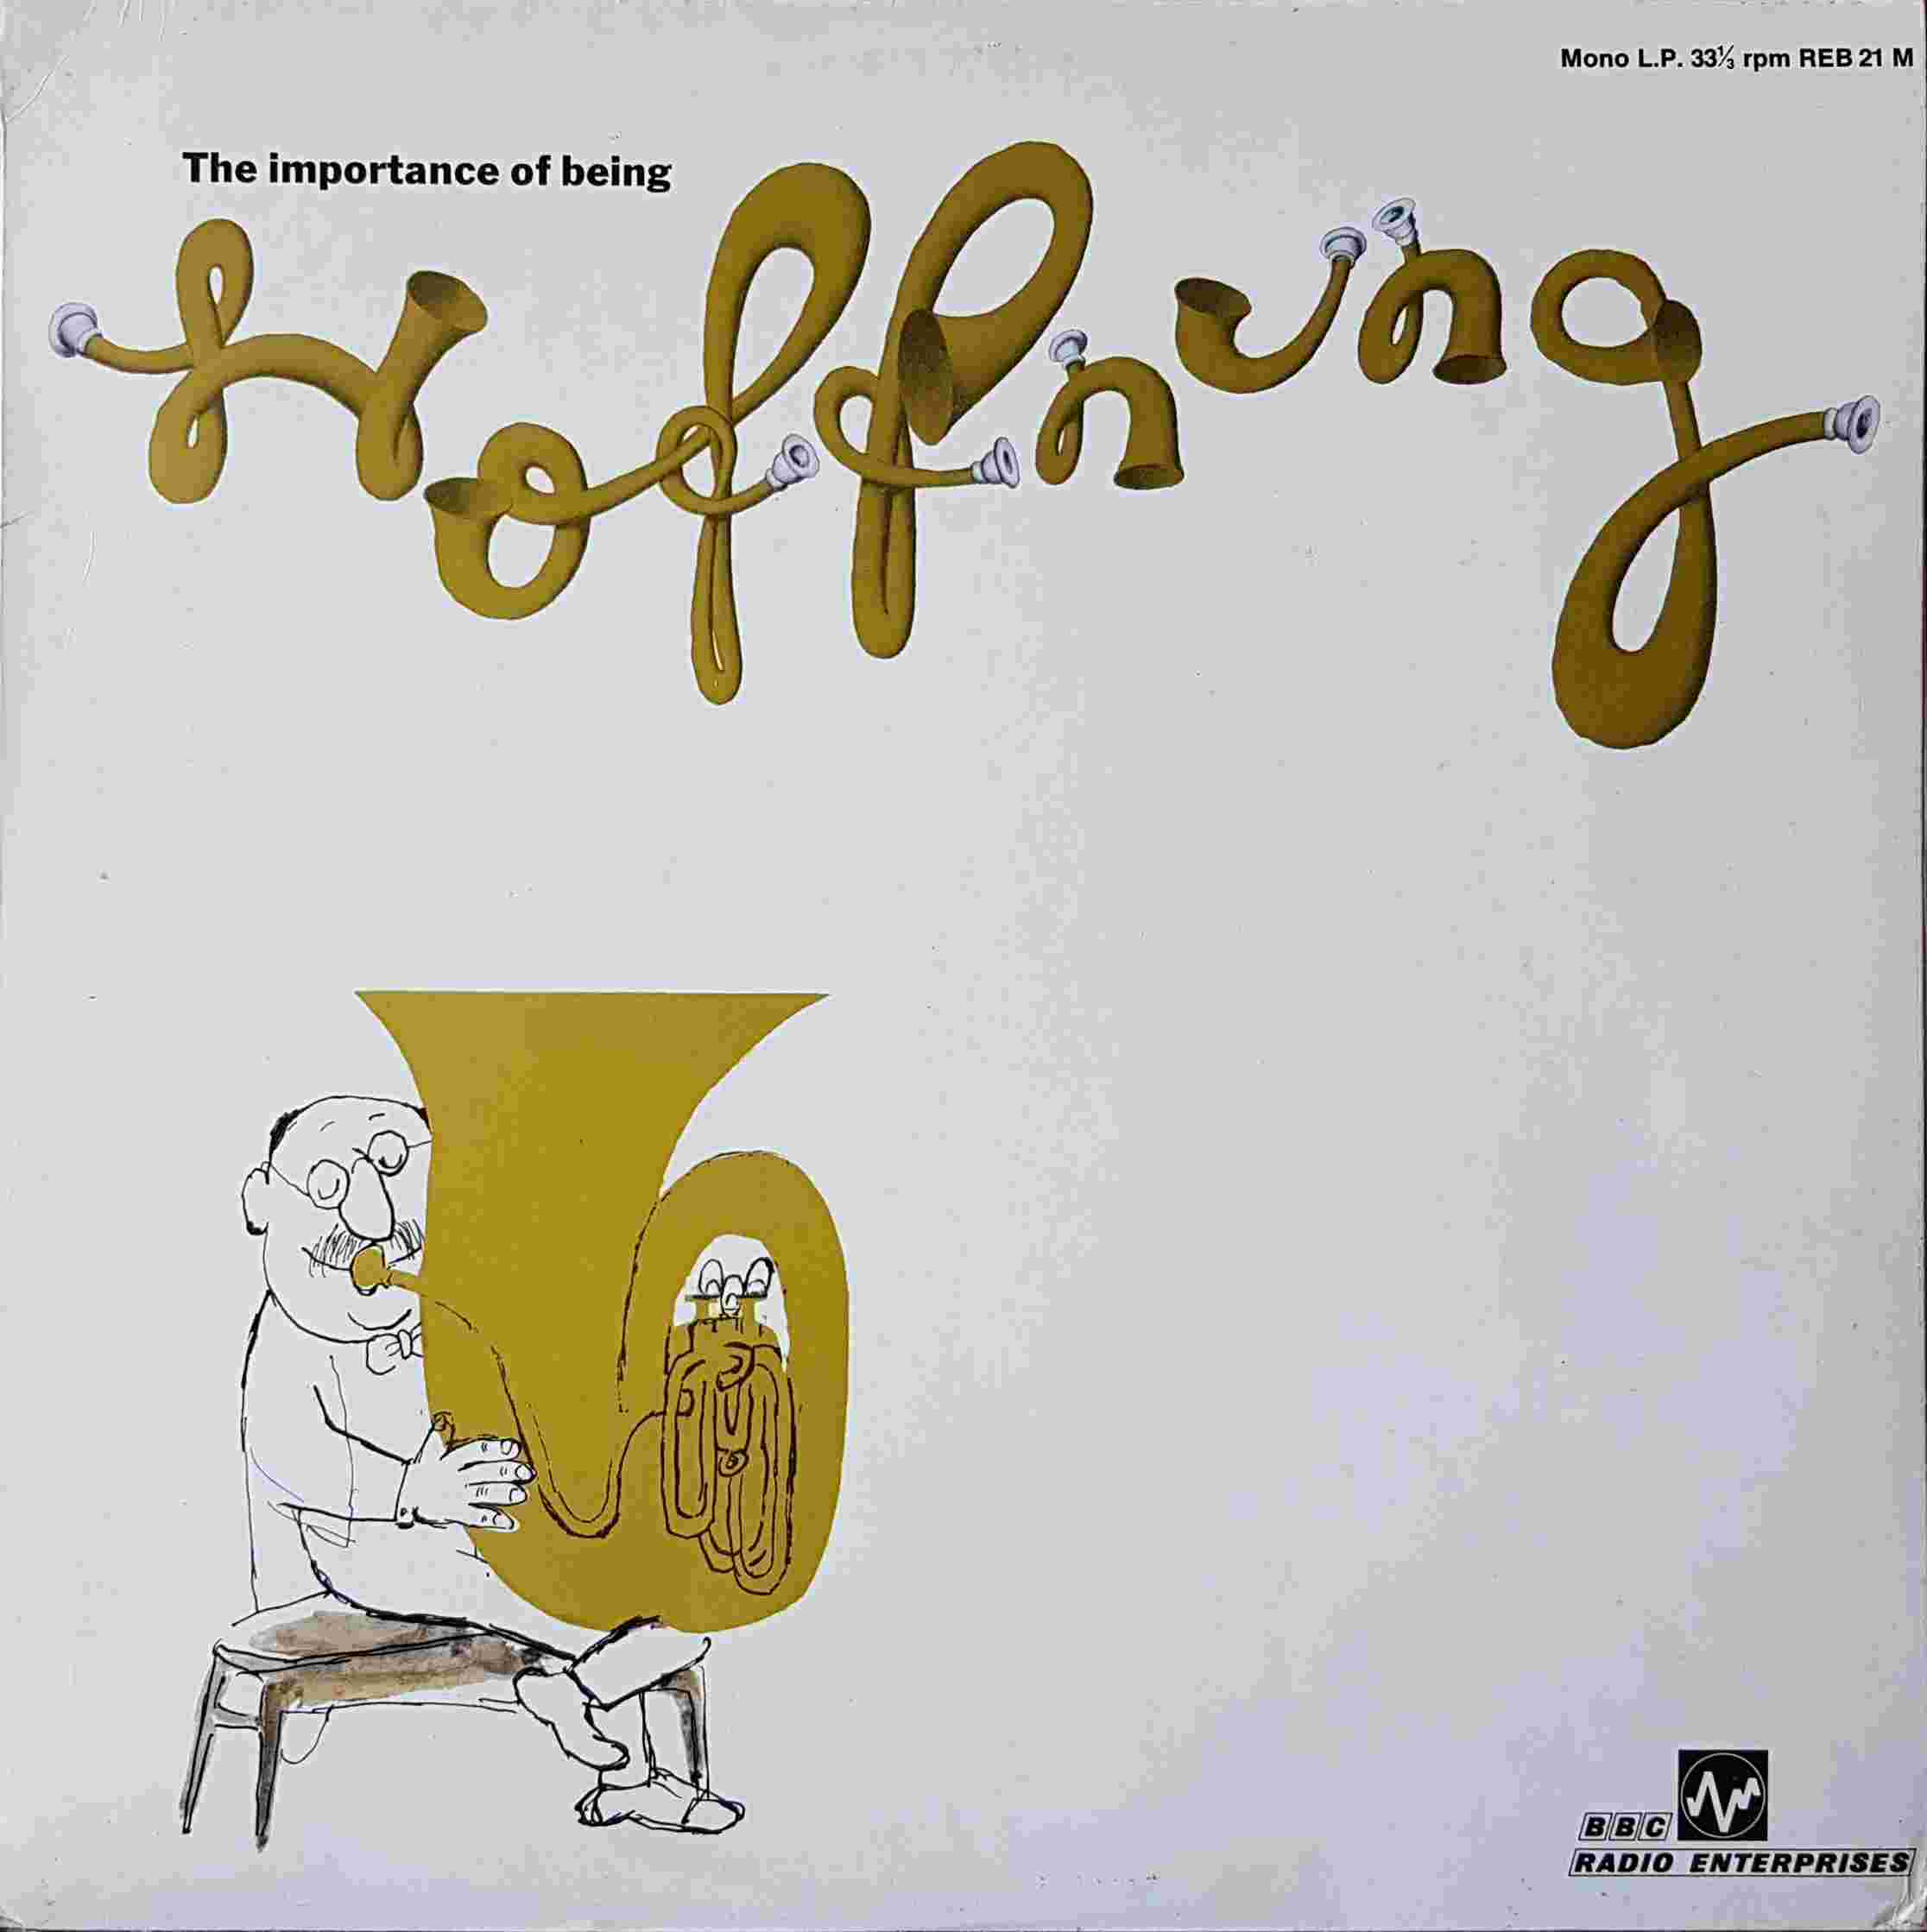 Picture of REB 21 The importance of being Hoffnung by artist Hoffnung from the BBC albums - Records and Tapes library